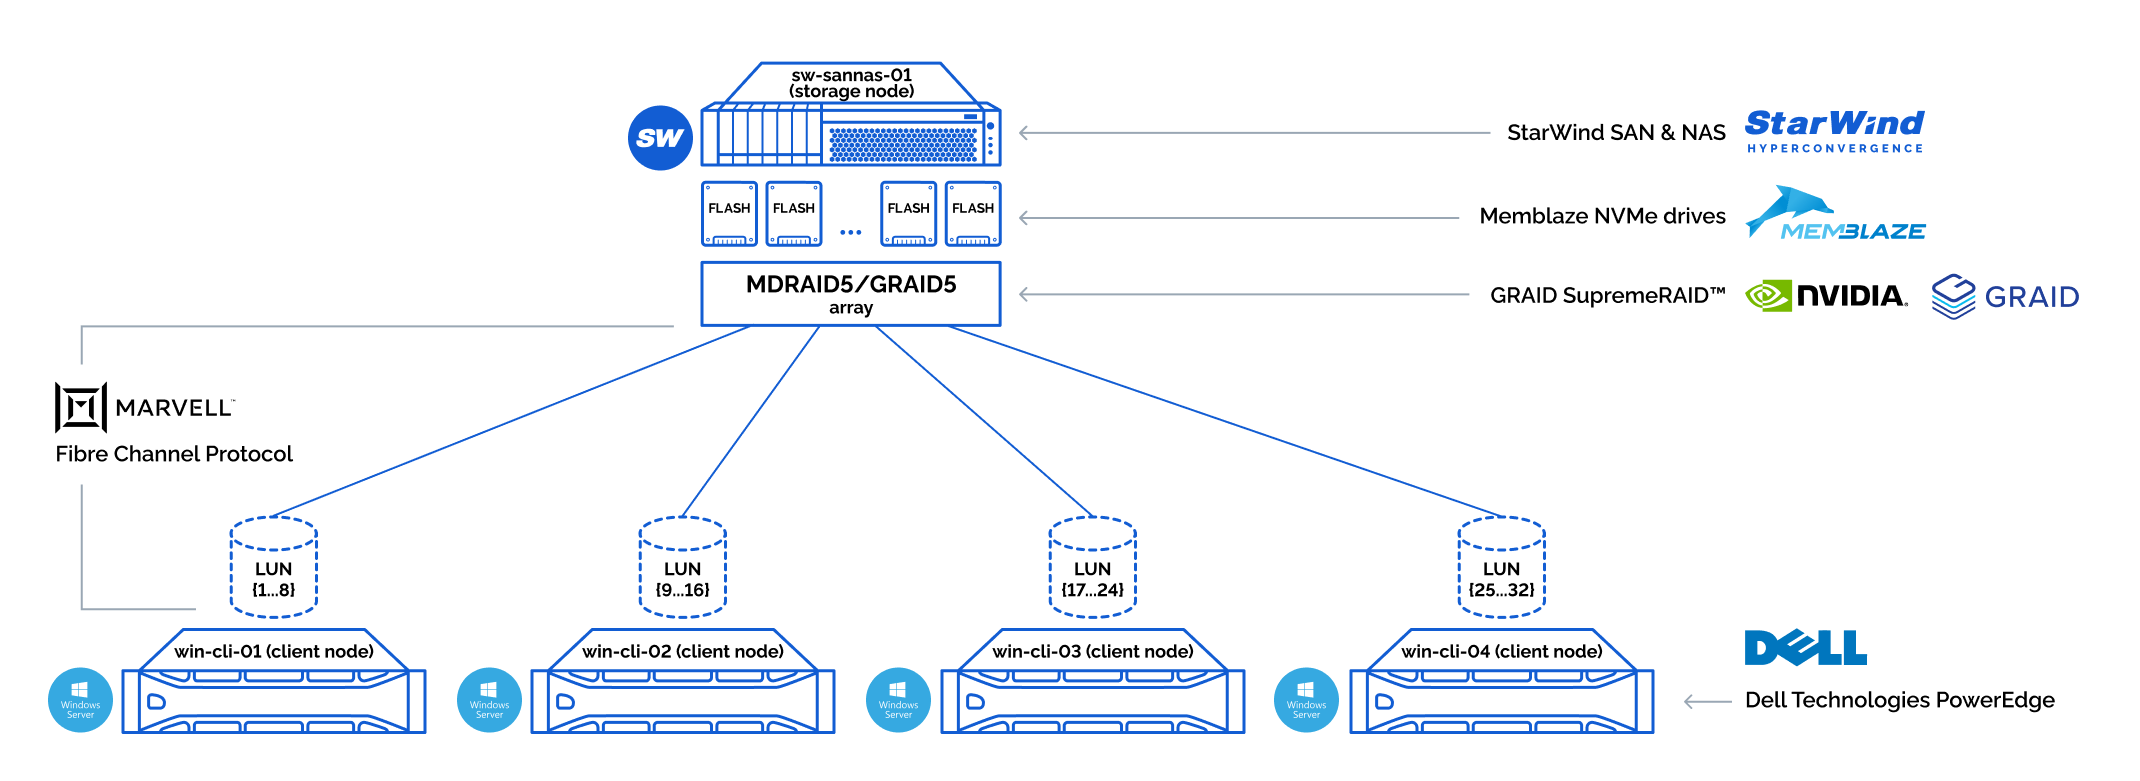 Storage connection diagram; dedicated storage node full of NVMe drives (MDRAID/GRAID) and StarWind SAN & NAS on top over FCP (Fibre Channel Protocol) to client nodes (Dell PowerEdge).